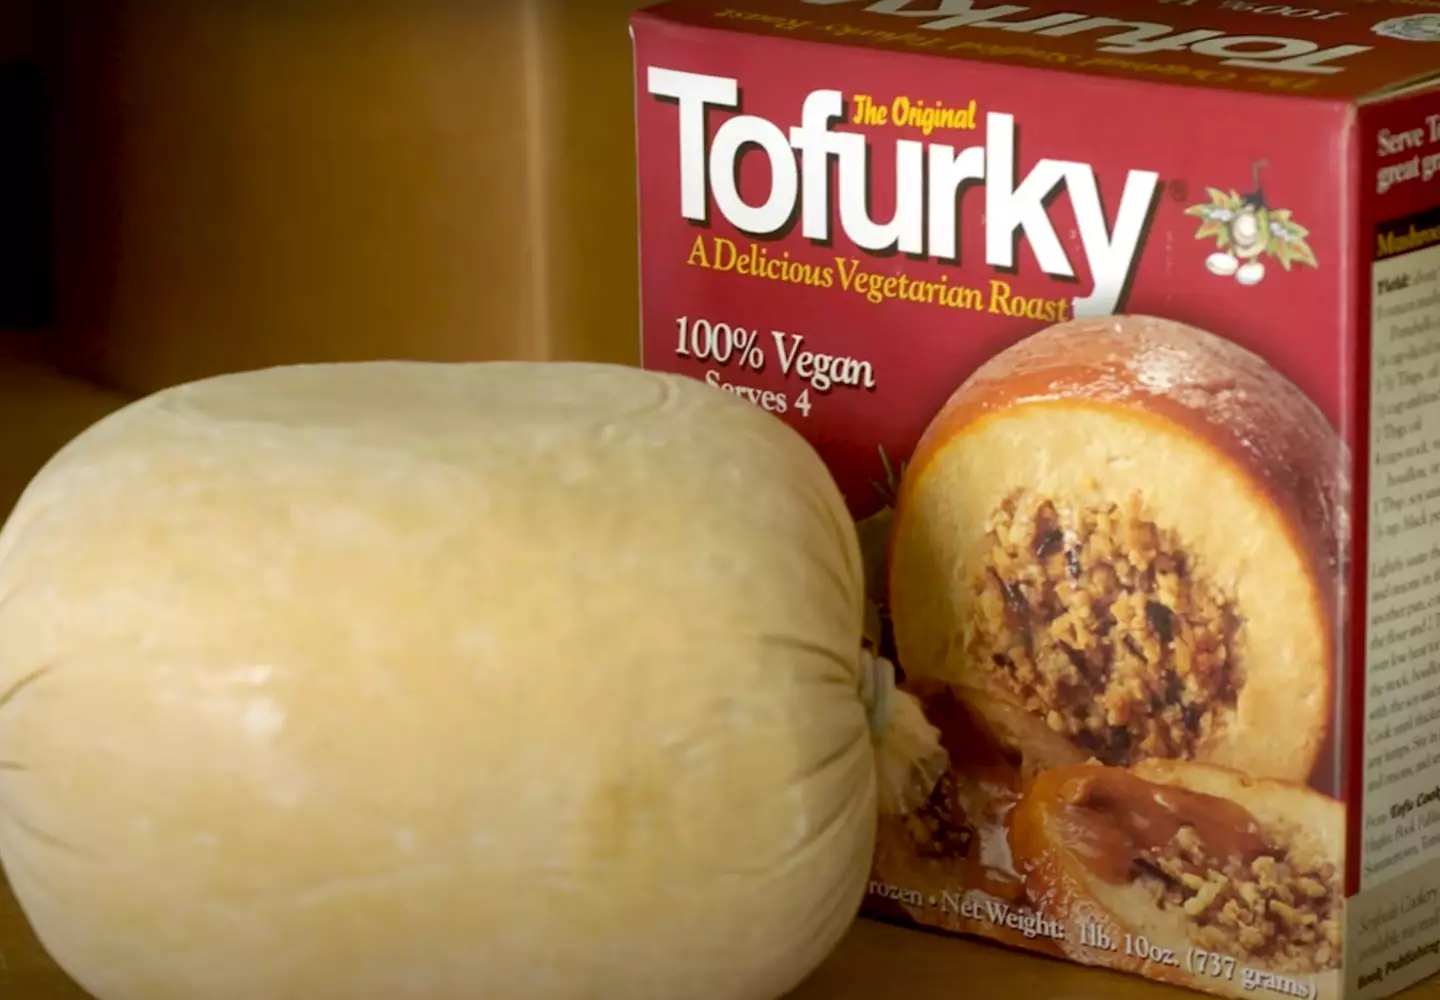 How Tofurky is made in a factory has put people off the dish and resulted in jokes and mockery